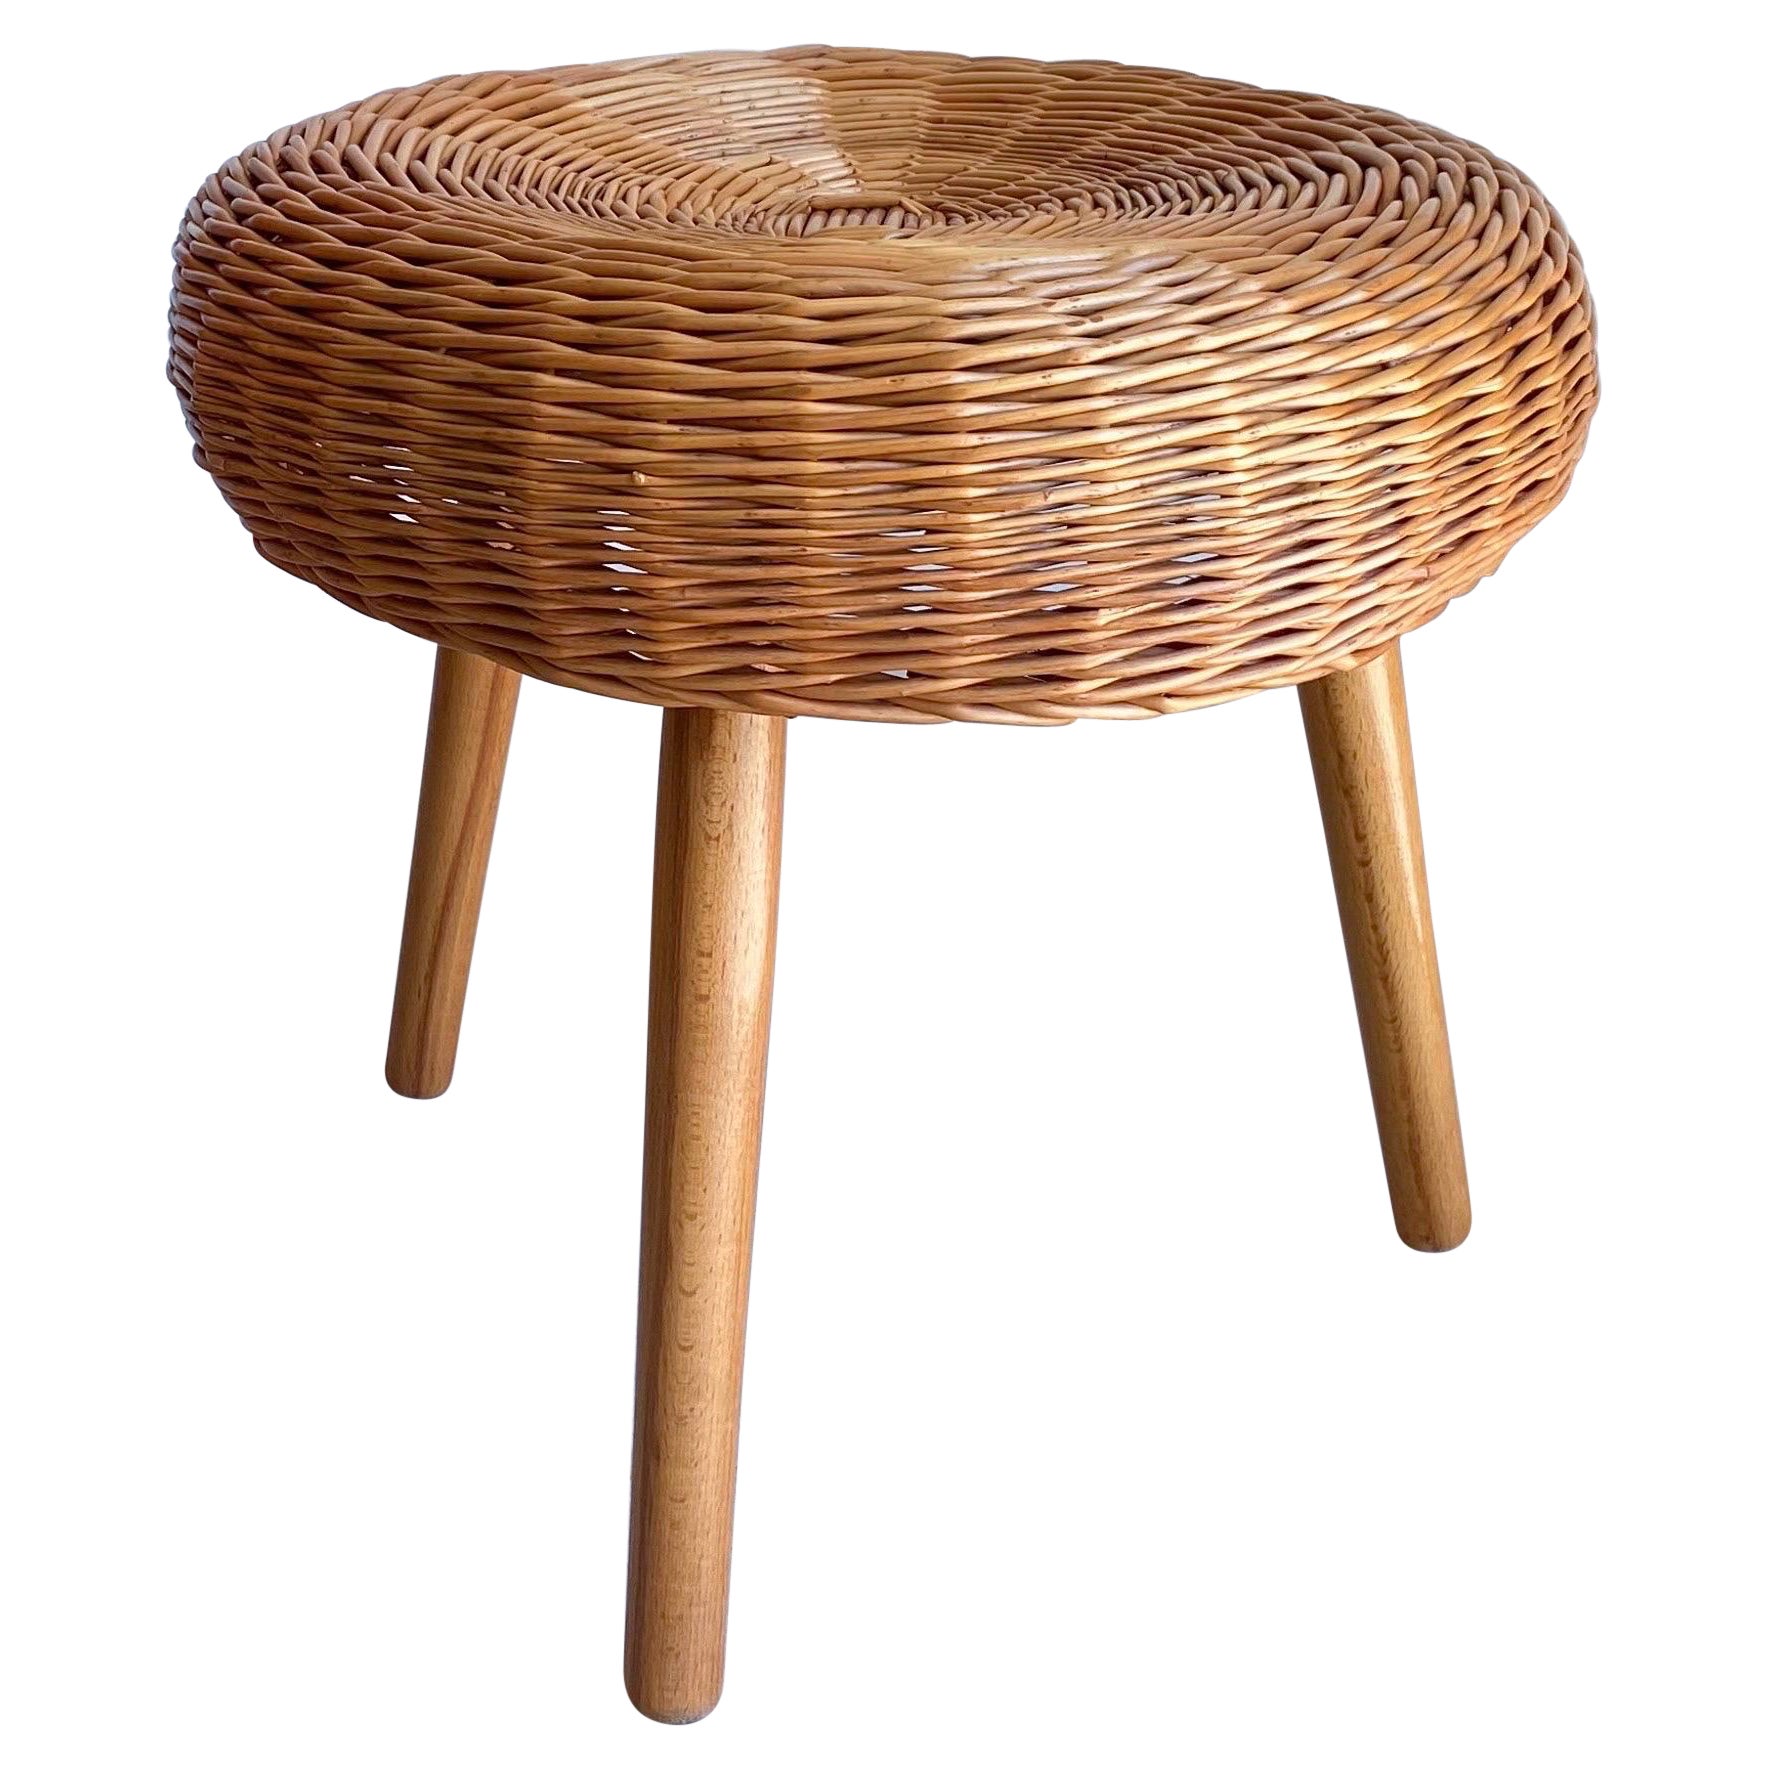 Large Rattan and Wood Stool Attributed to Tony Paul, 1960